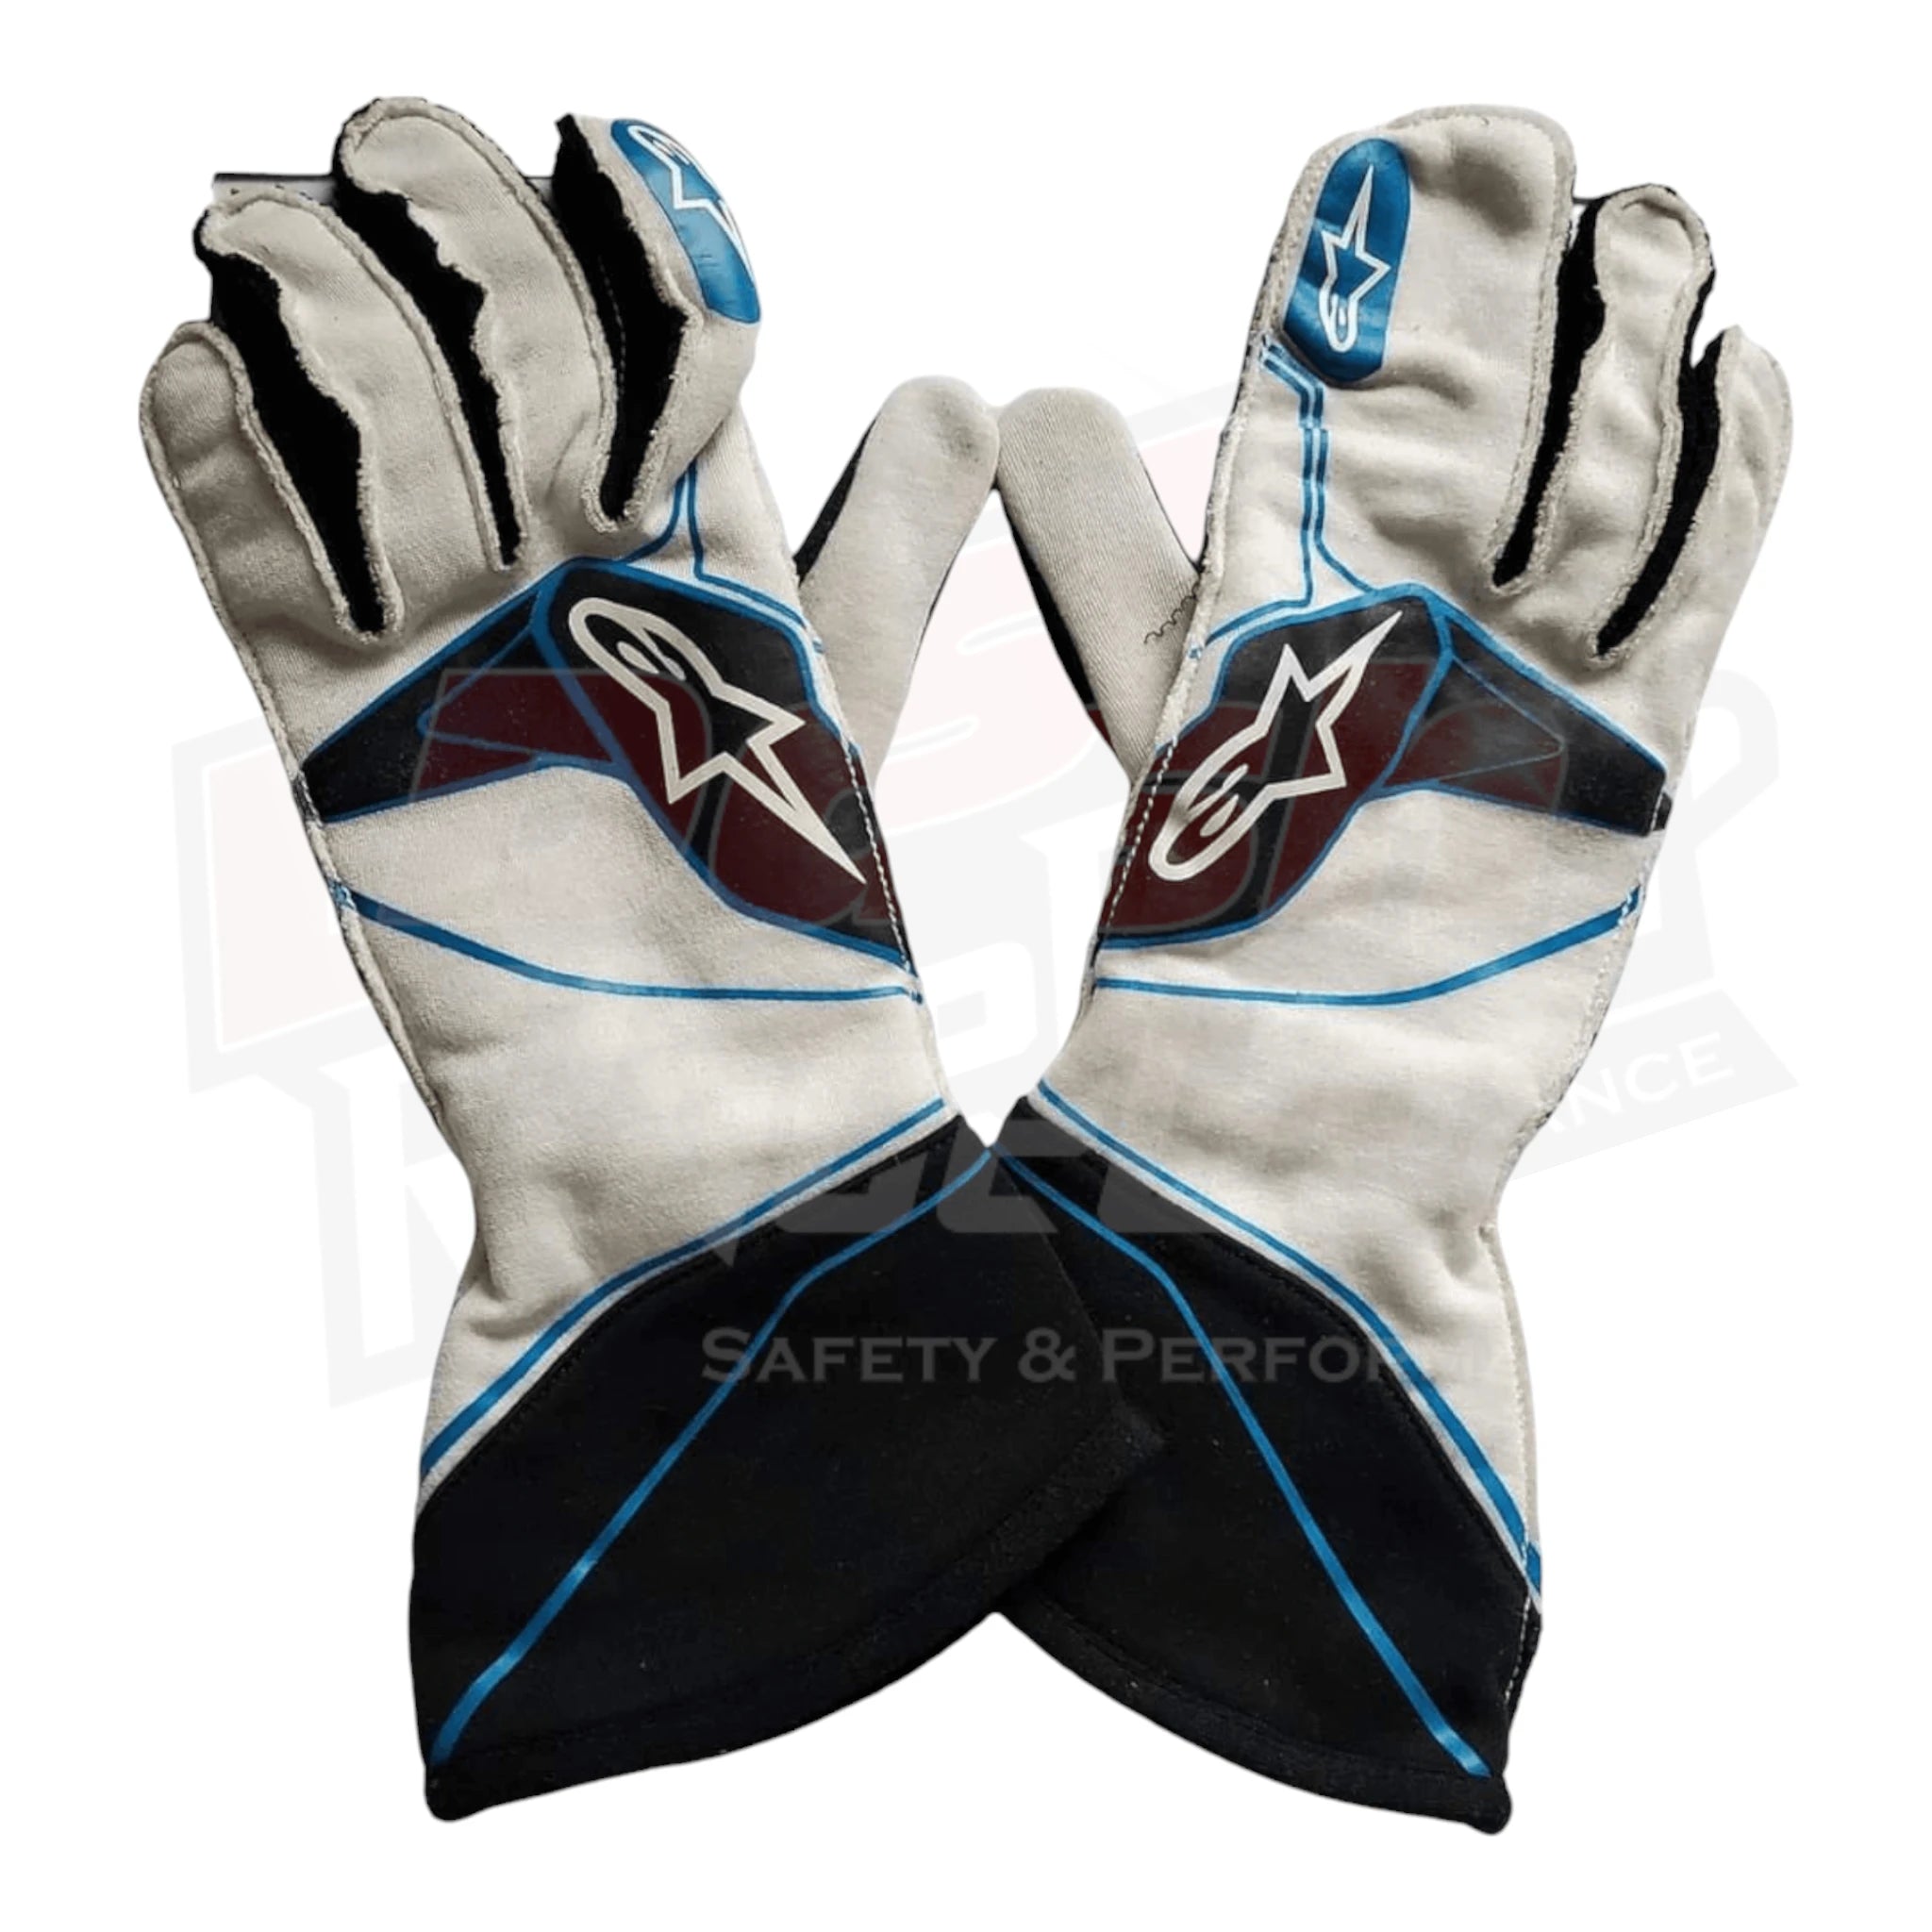 2019 George Russell Williams F1 Race Gloves